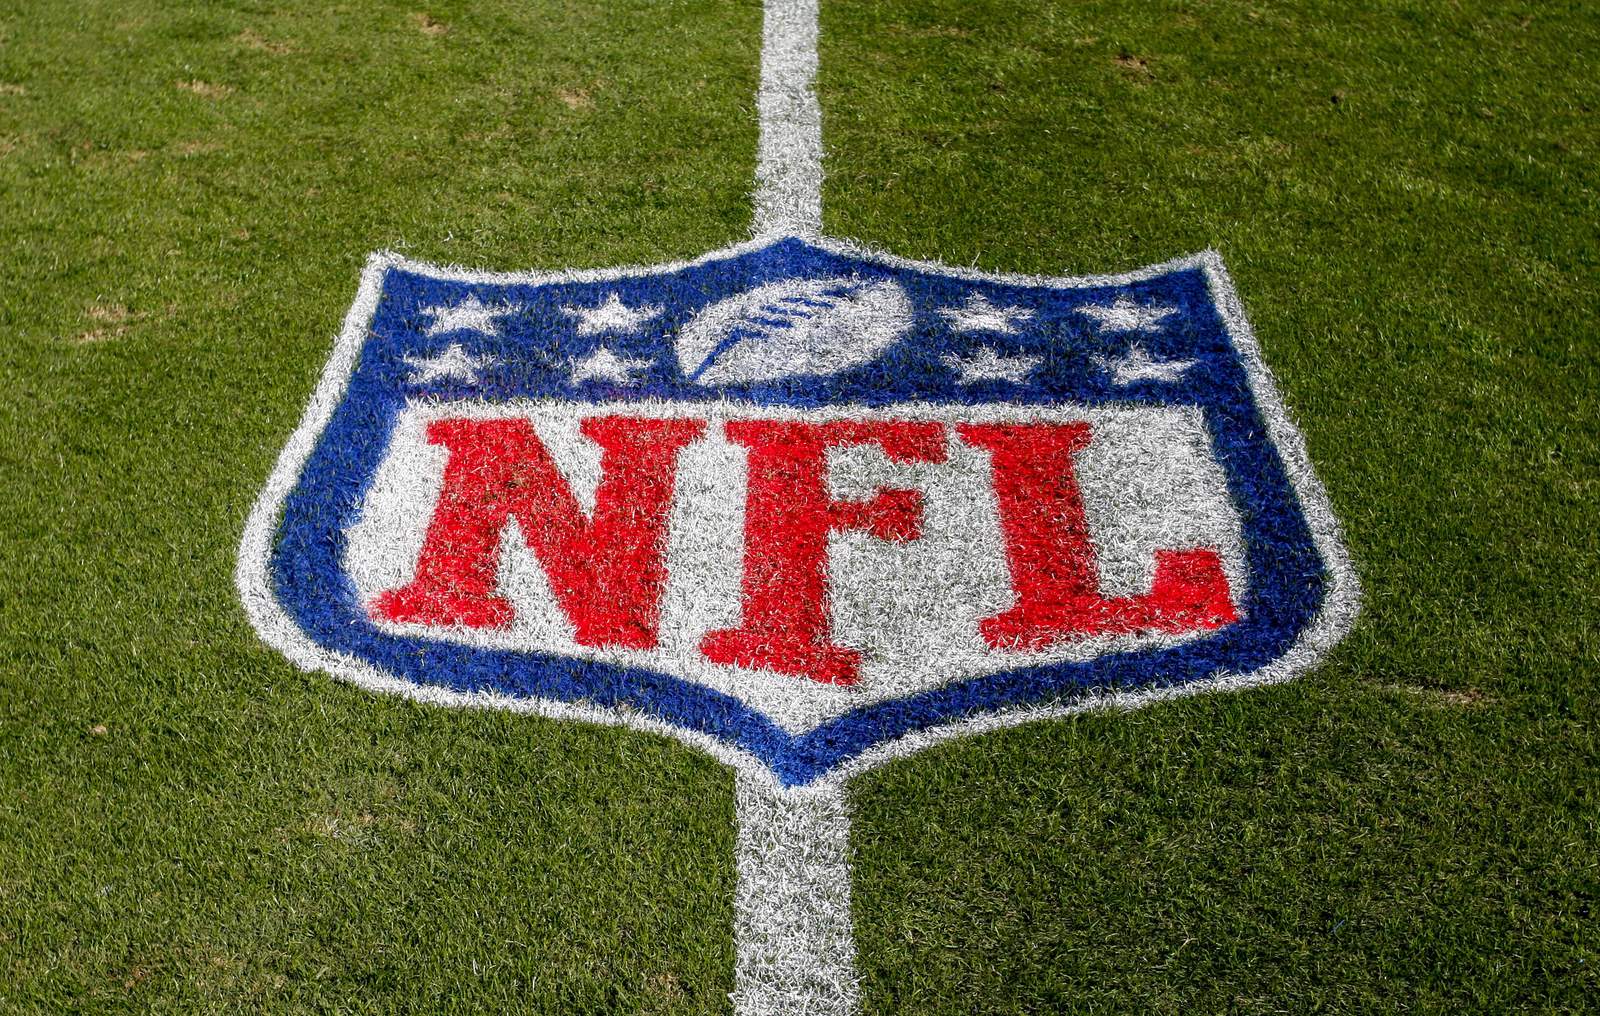 NFL giving free Super Bowl tickets to 7,500 health workers